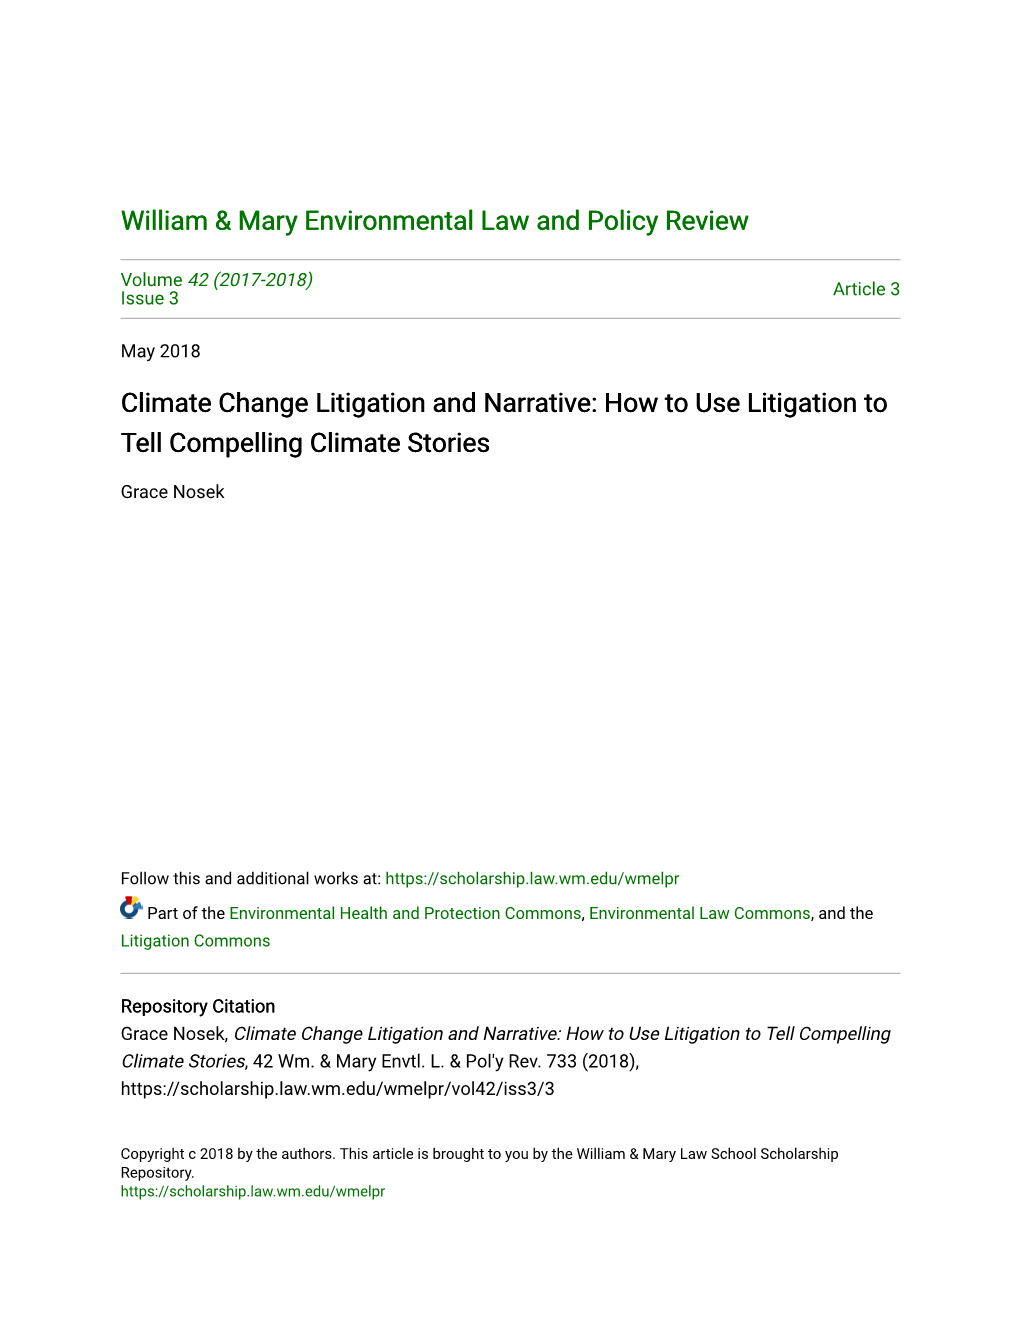 Climate Change Litigation and Narrative: How to Use Litigation to Tell Compelling Climate Stories